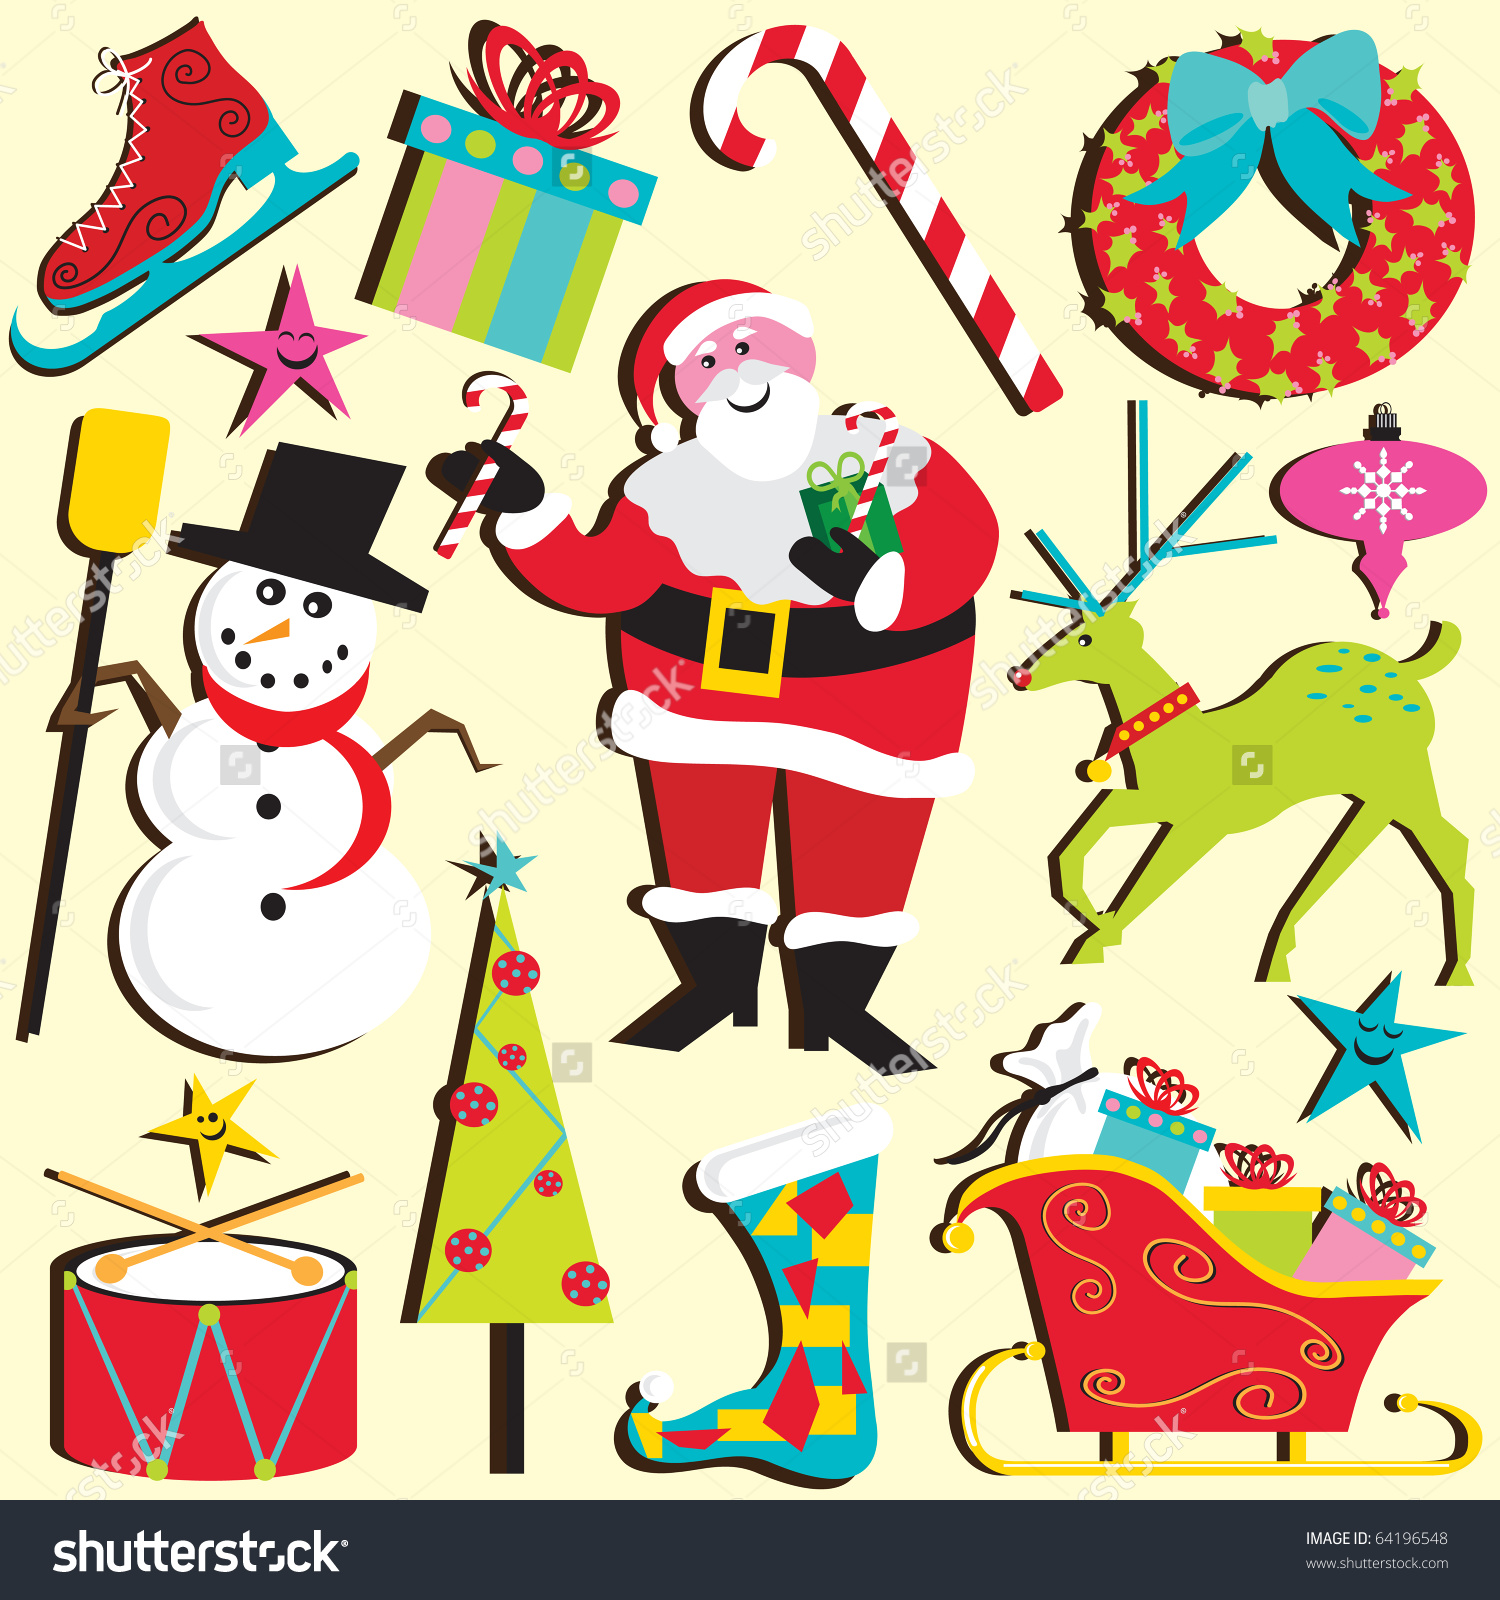 Cute Selection Of Christmas Clipart Elements And Icons. Stock.